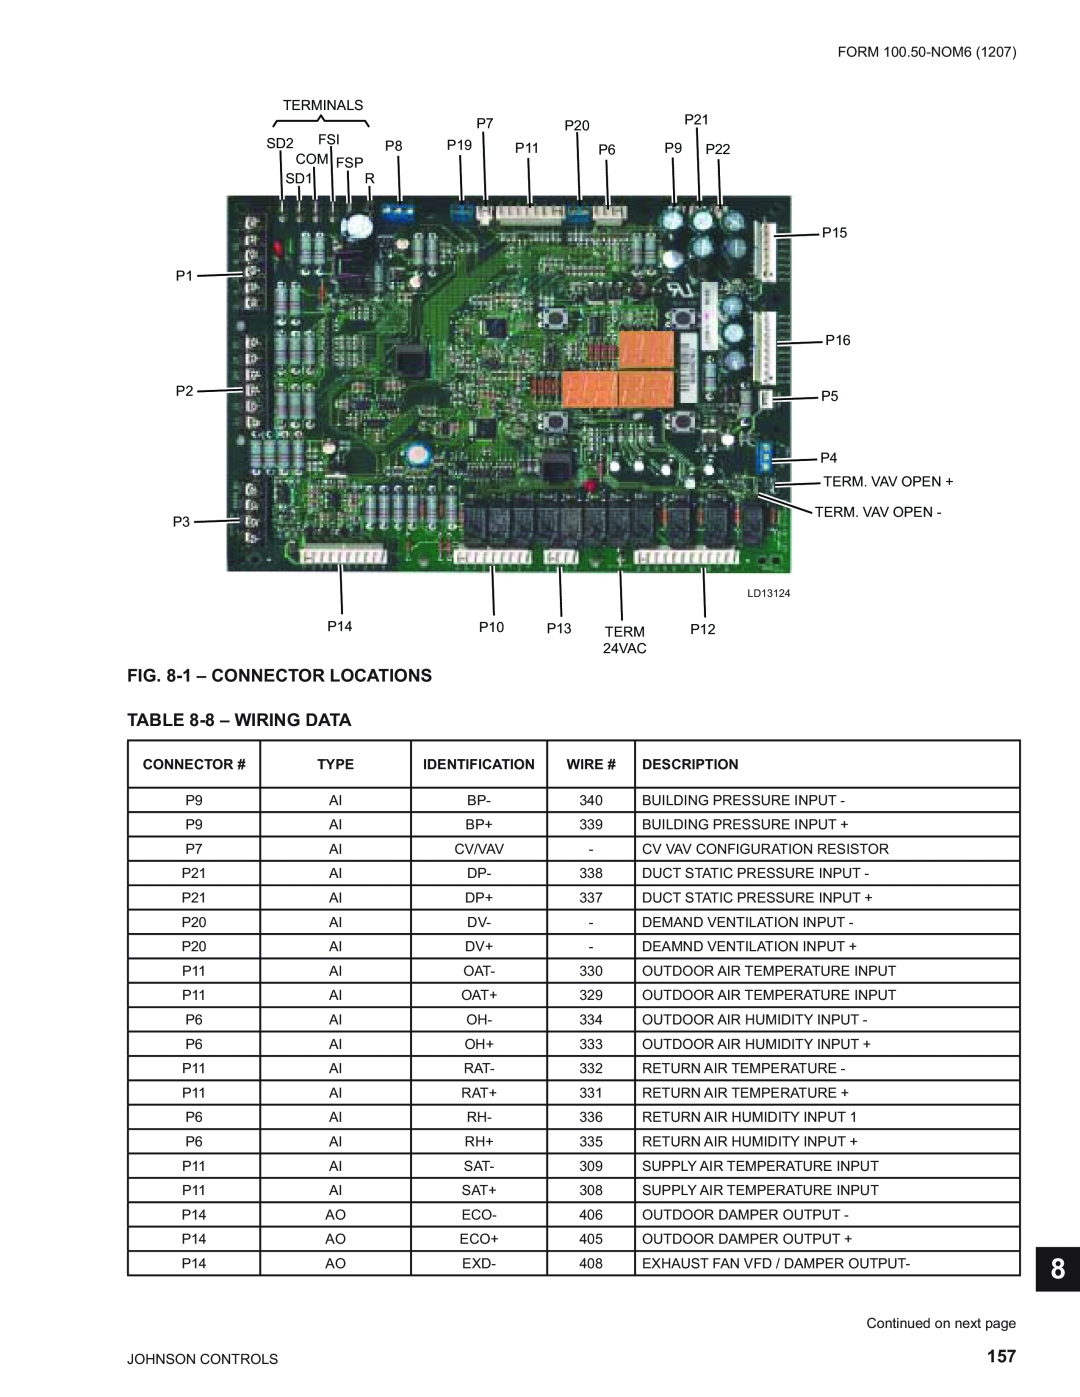 York YPAL 050, YPAL 061, YPAL 051, YPAL 060 manual 1 - CONNECTOR LOCATIONS, 8 - WIRING DATA, Rat+, Sat+ 